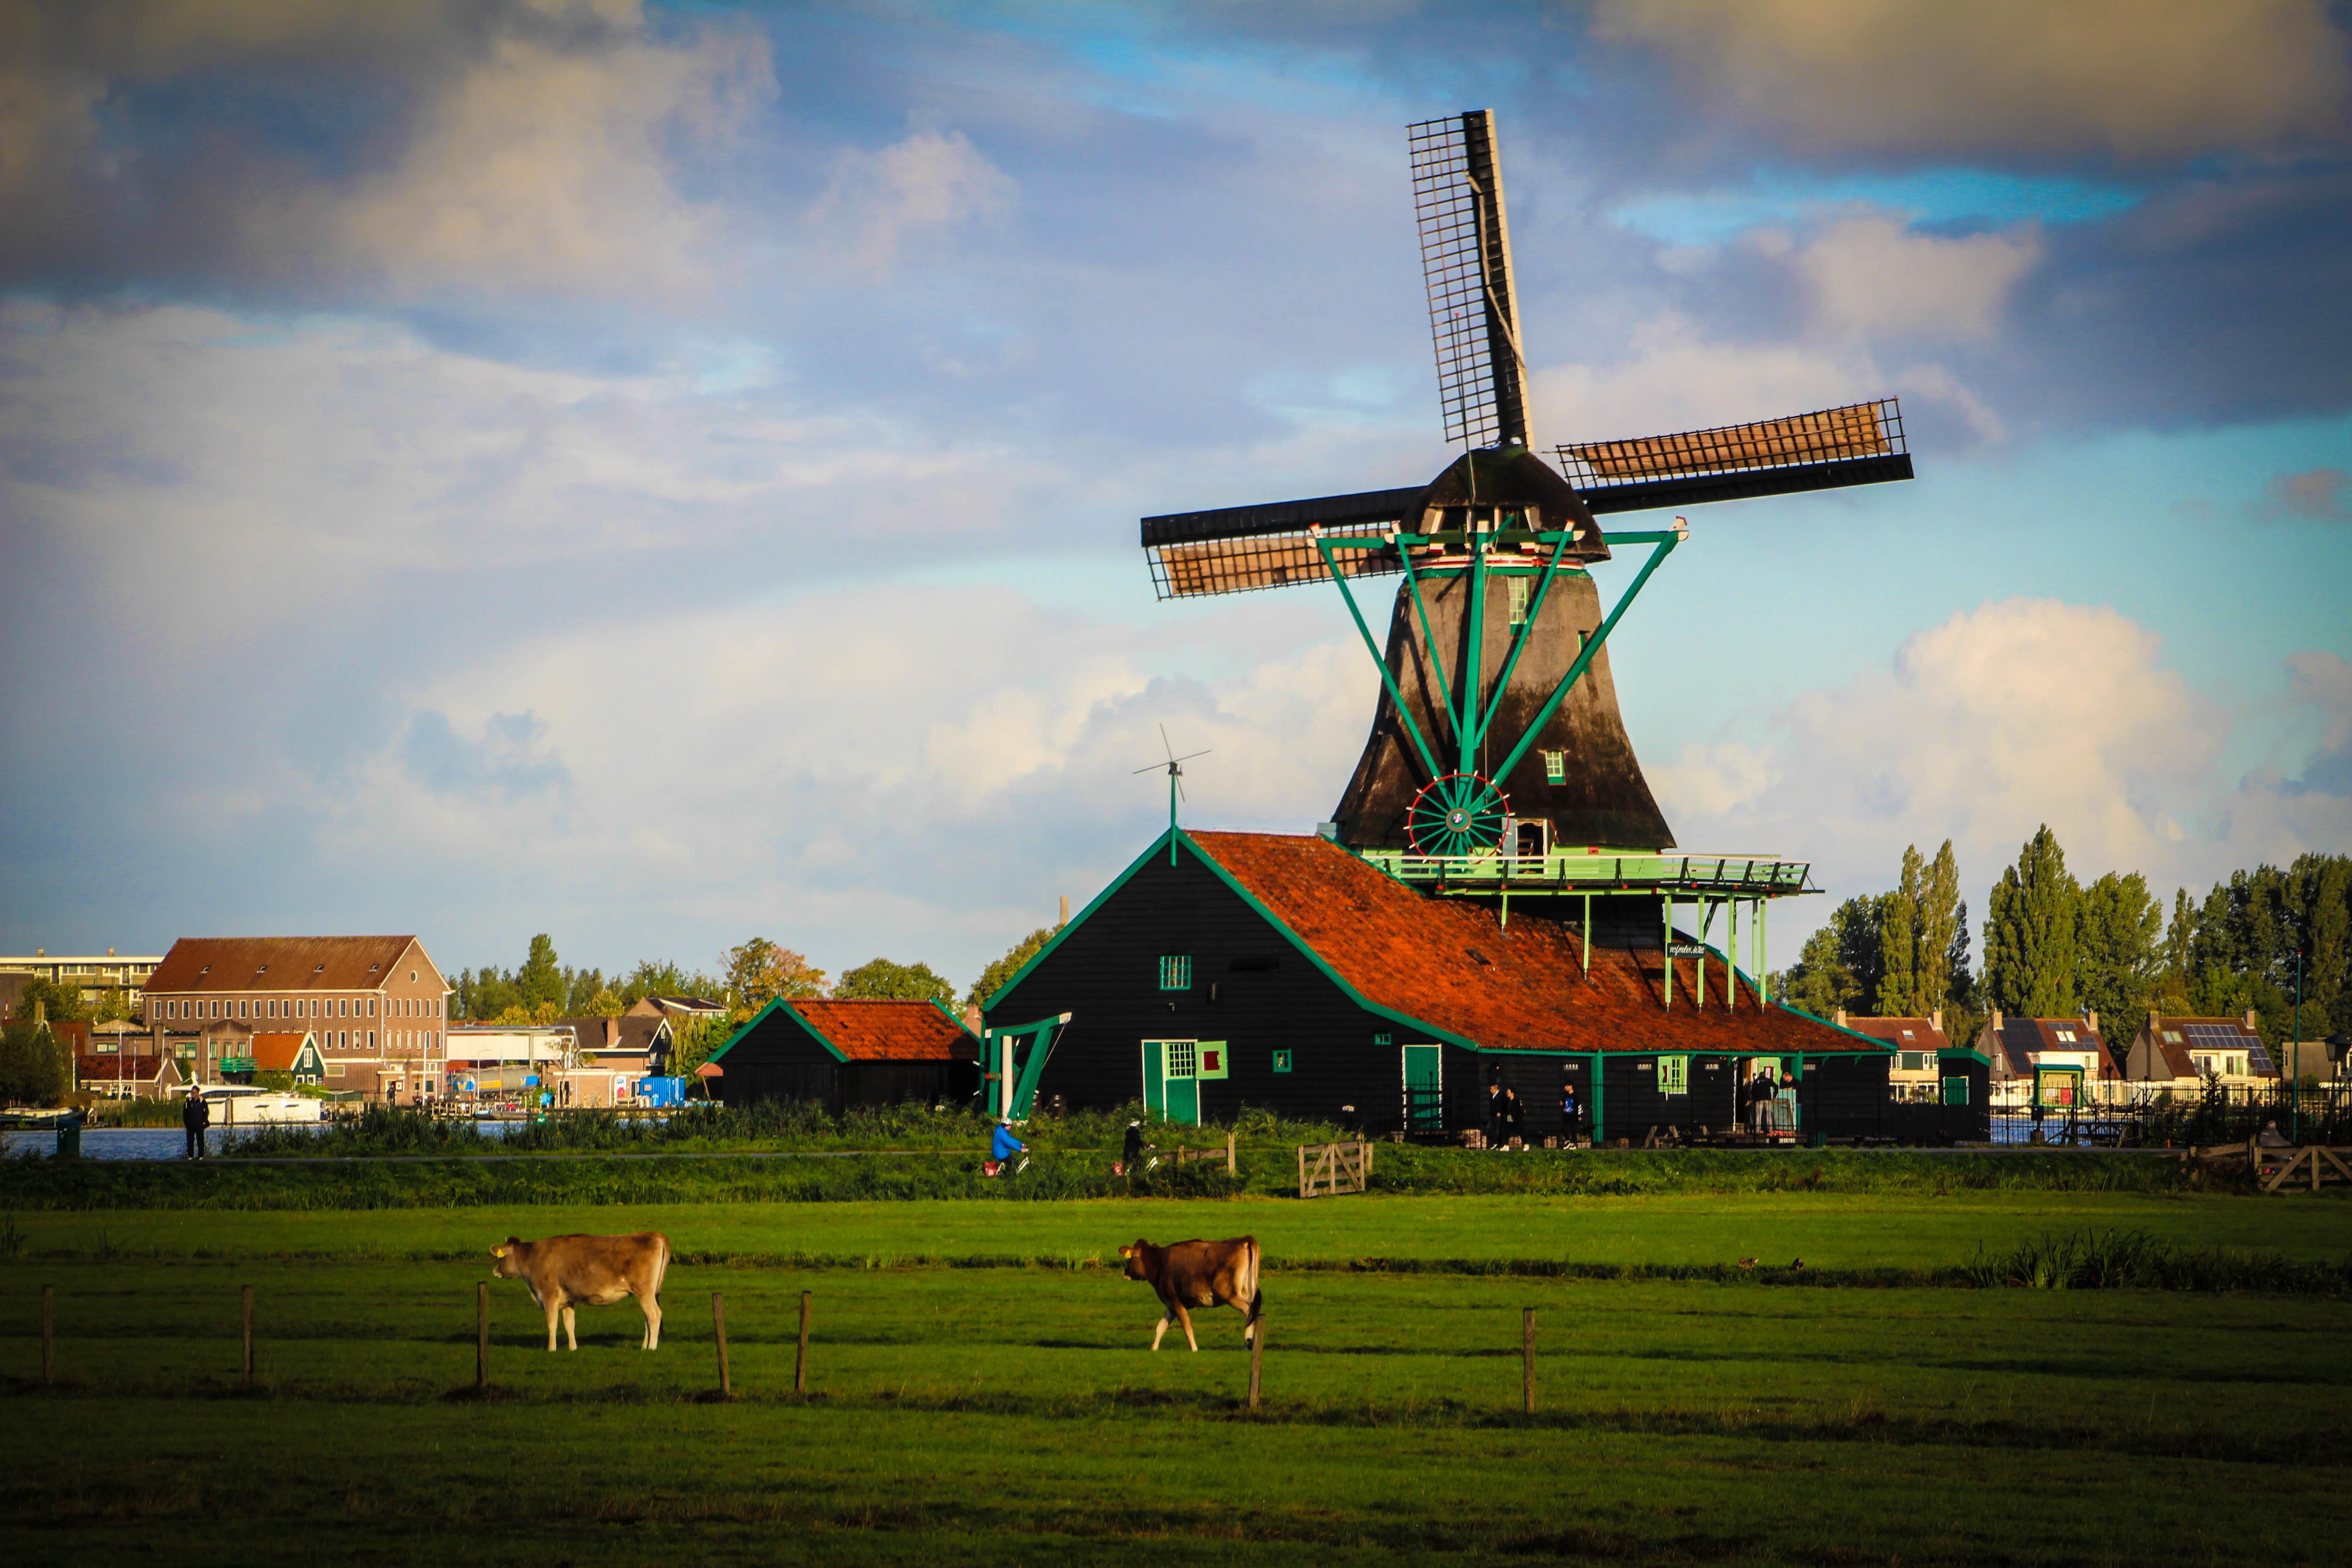 Tour-Dutch-countryside-with-Amsterdam-canal-cruise-14